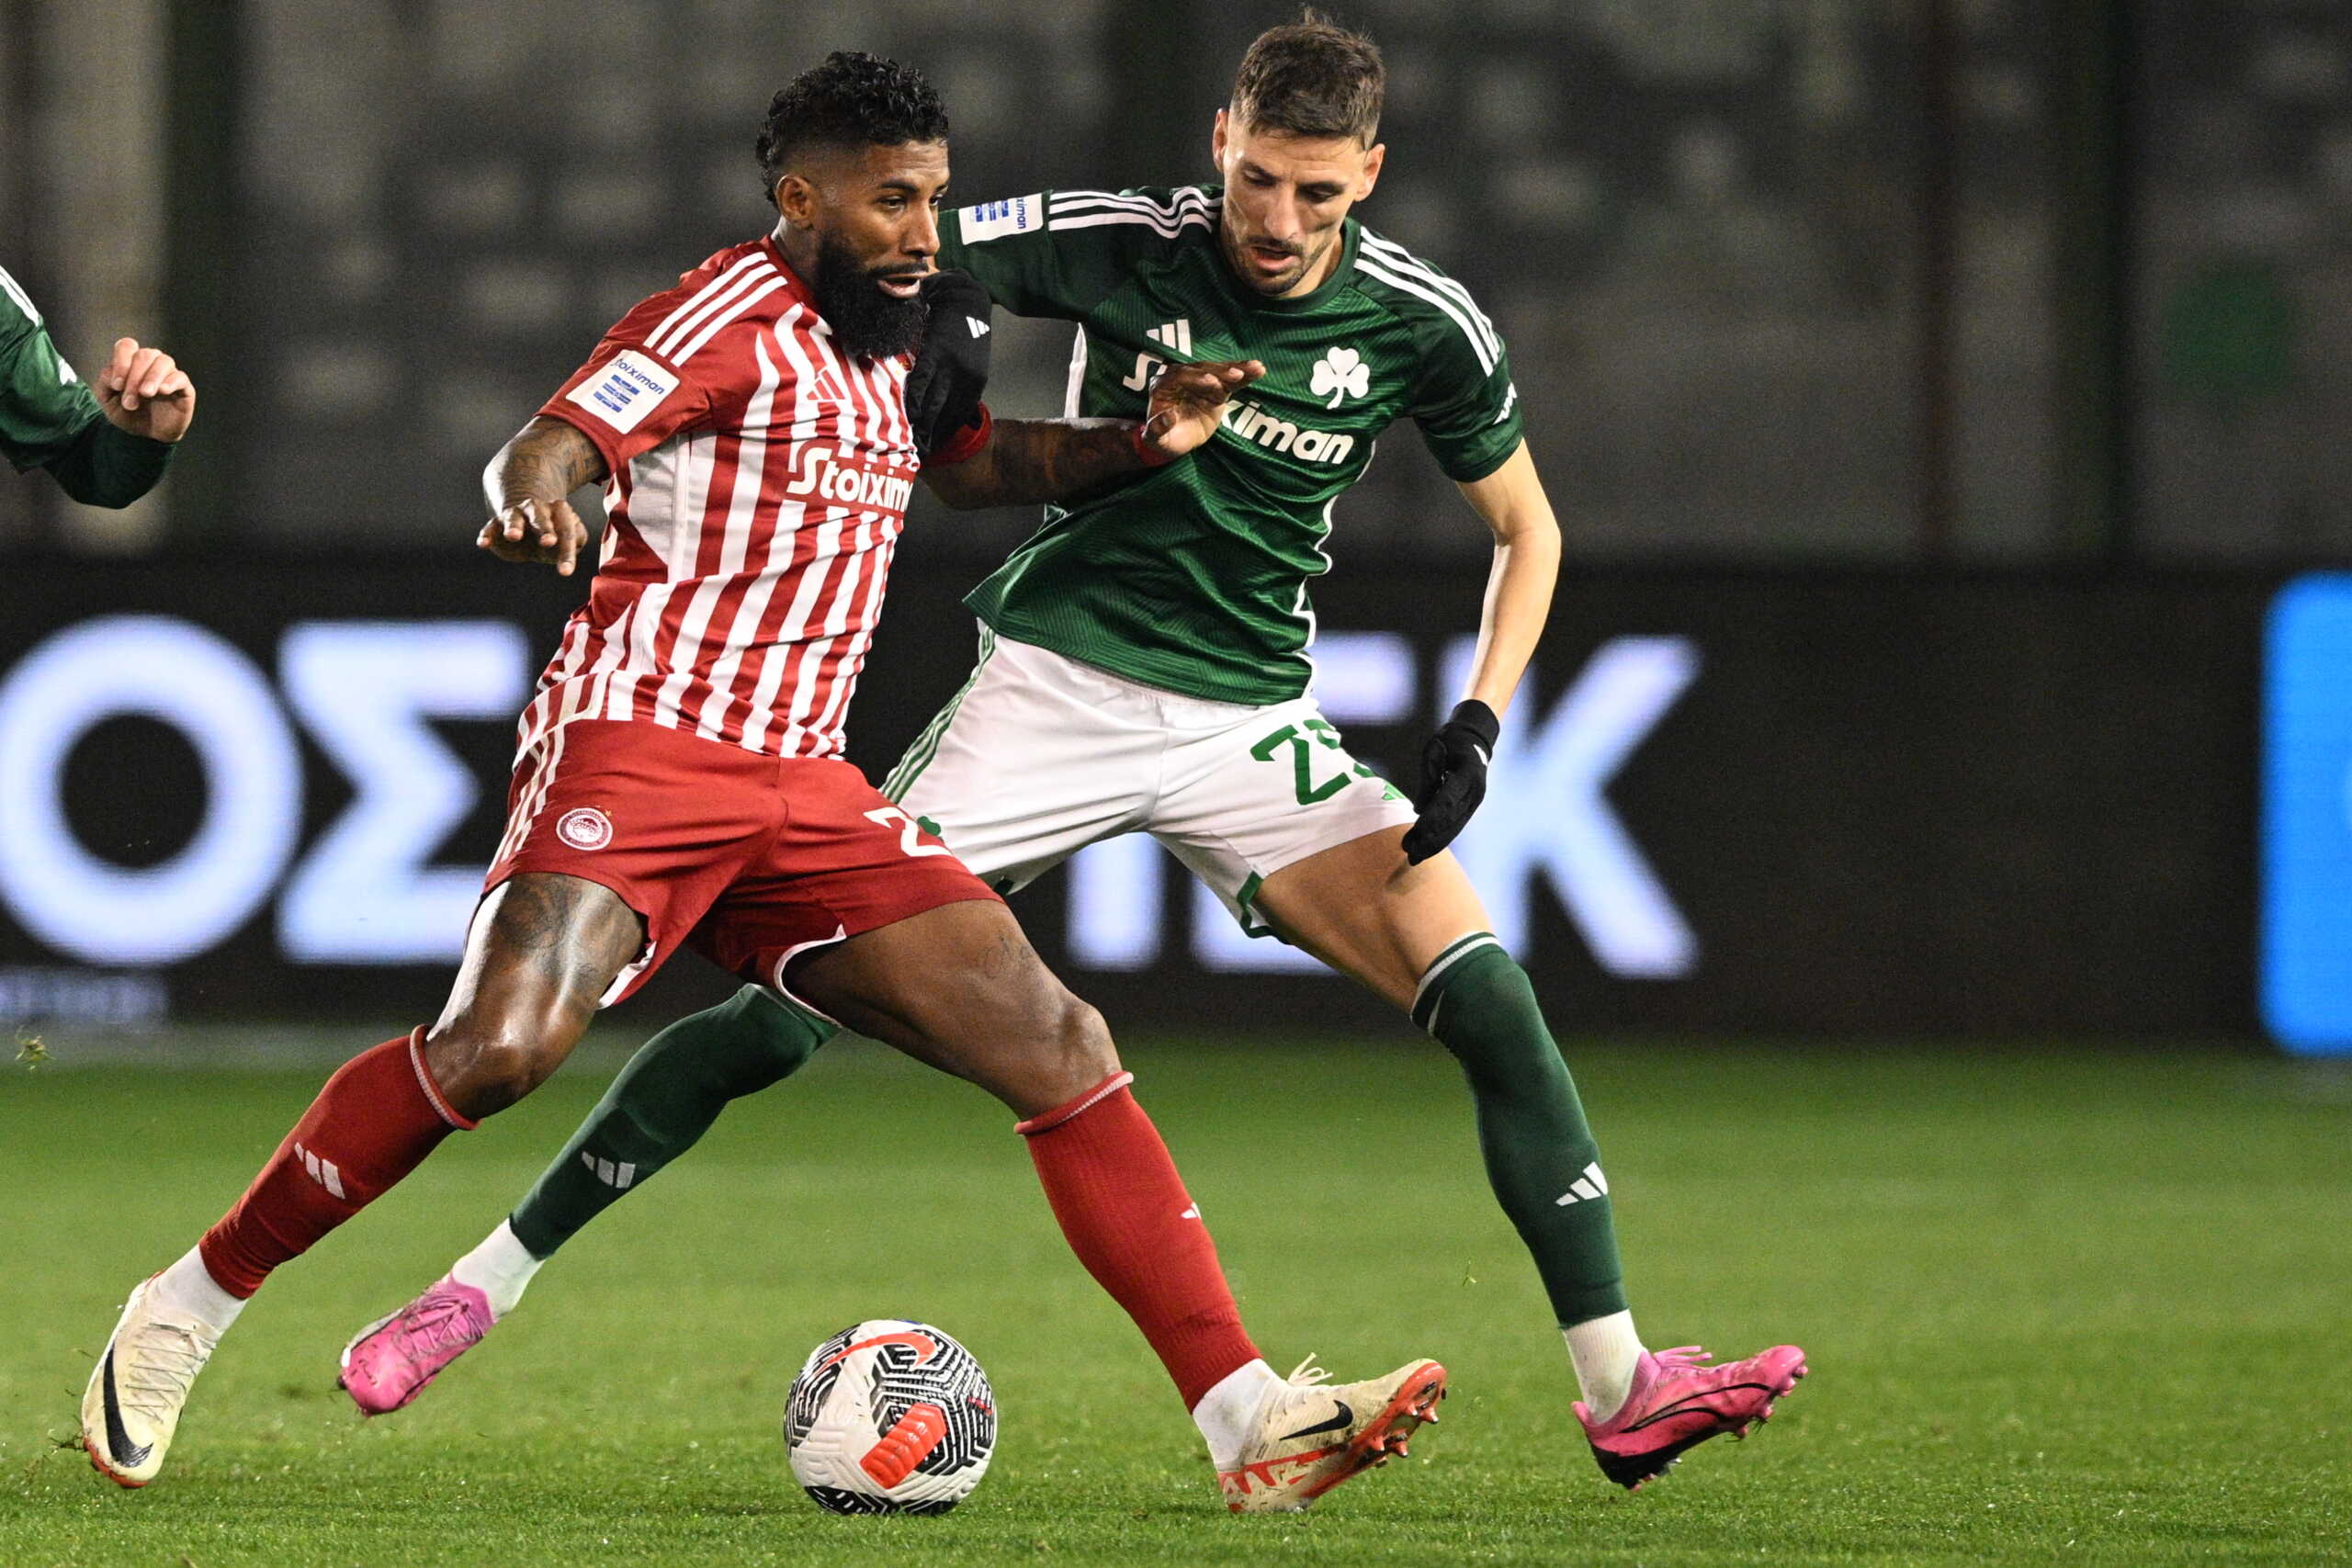 Panathinaikos: Derby of the Ages in the first round of the Super League qualifiers